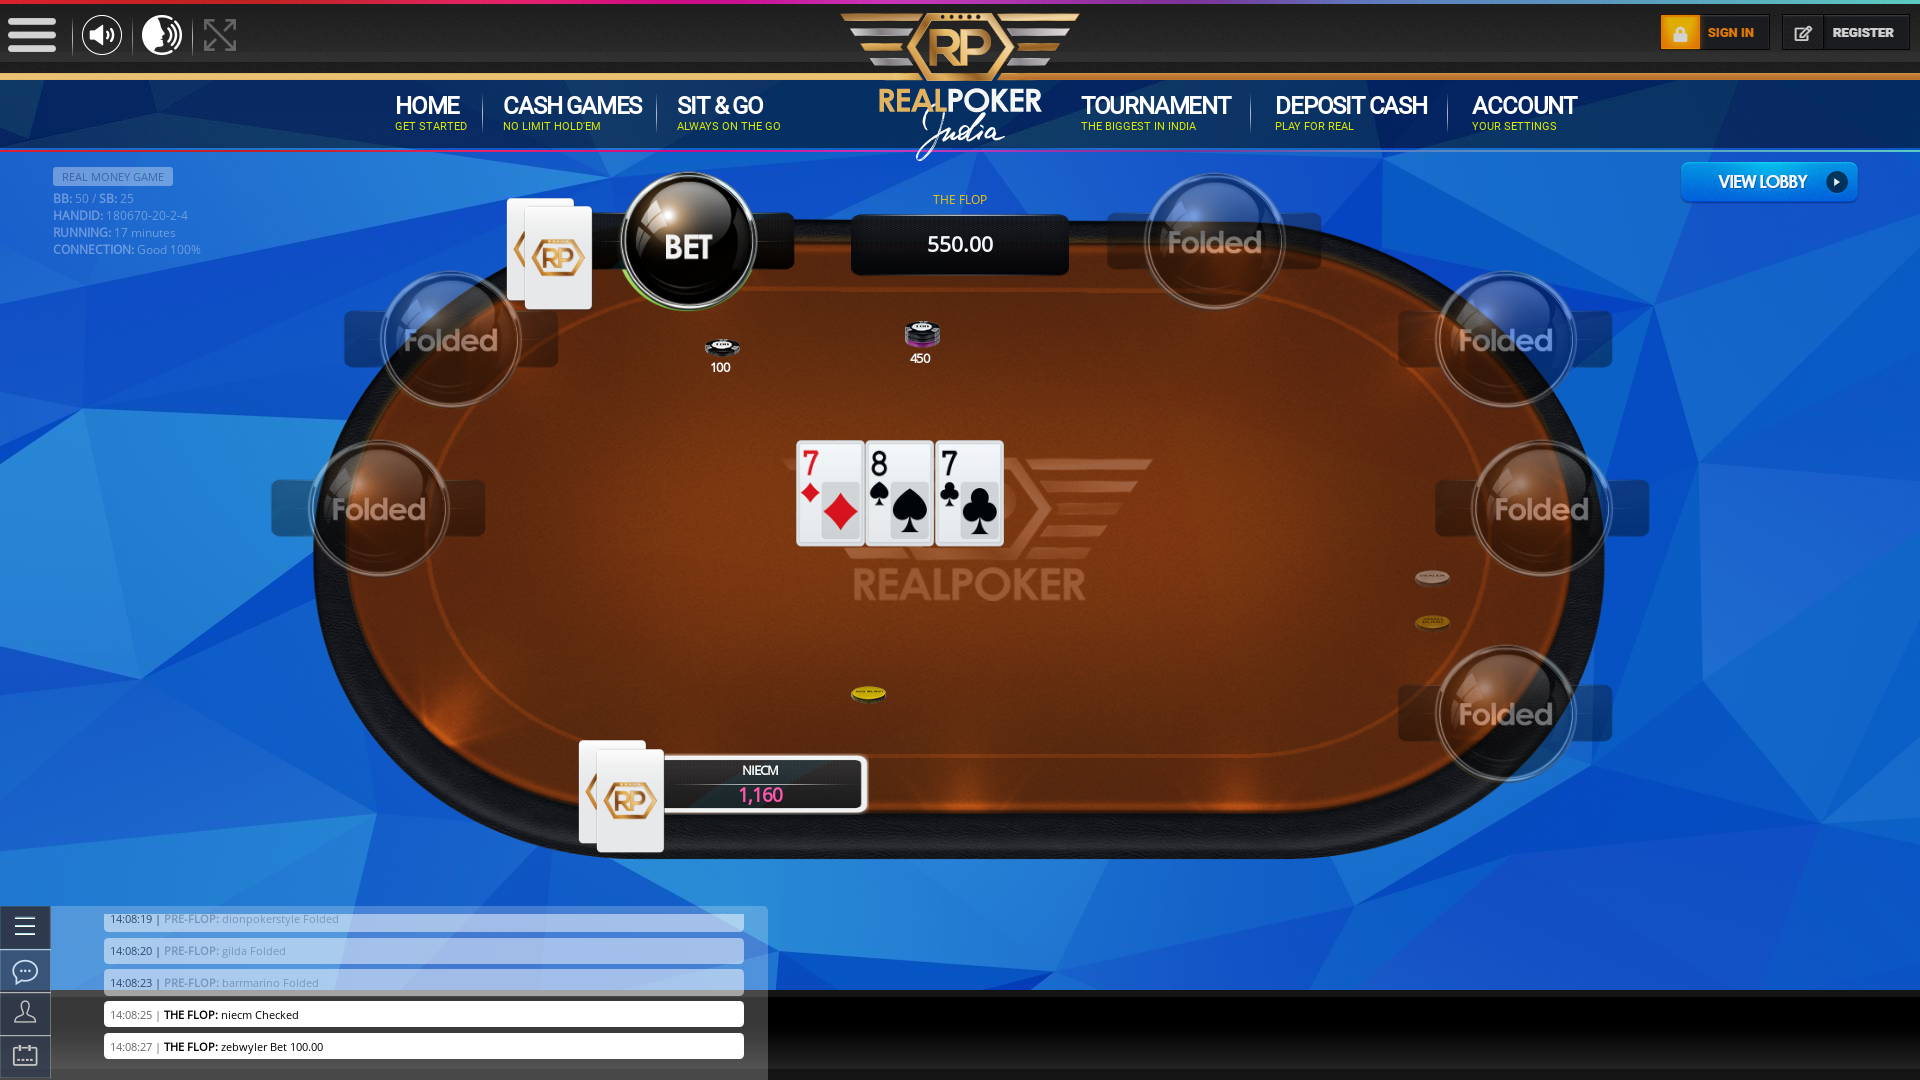 Real Indian poker on a 10 player table in the 17th minute of the game